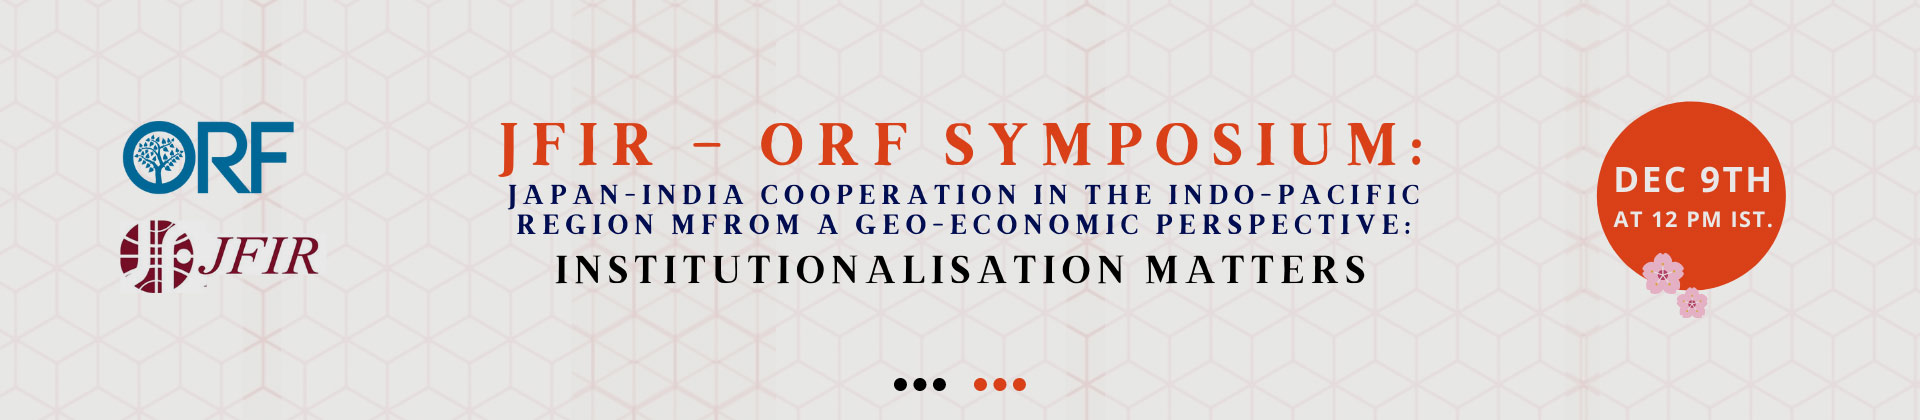 Japan-India Cooperation in the Indo-Pacific Region from a Geo-Economic Perspective: Institutionalisation Matters